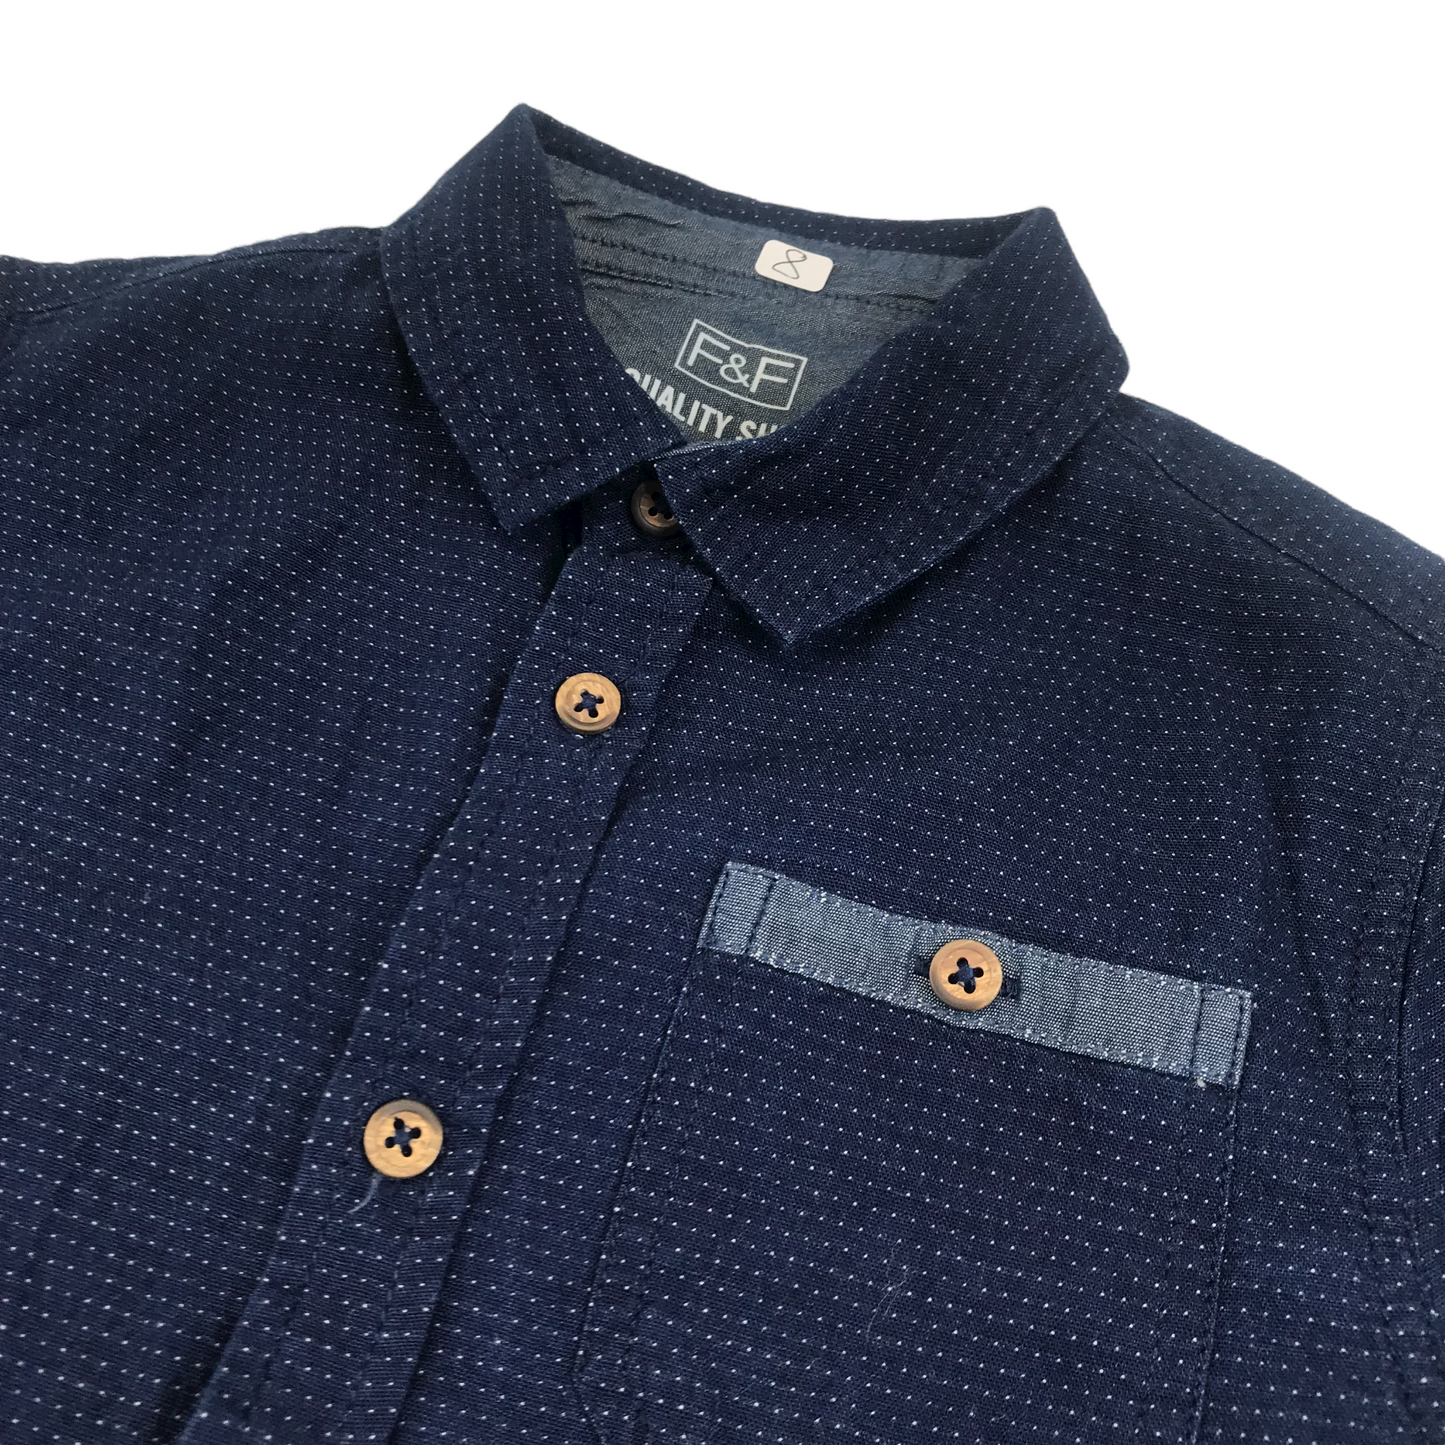 F&F Navy Spotted Shirt Age 8